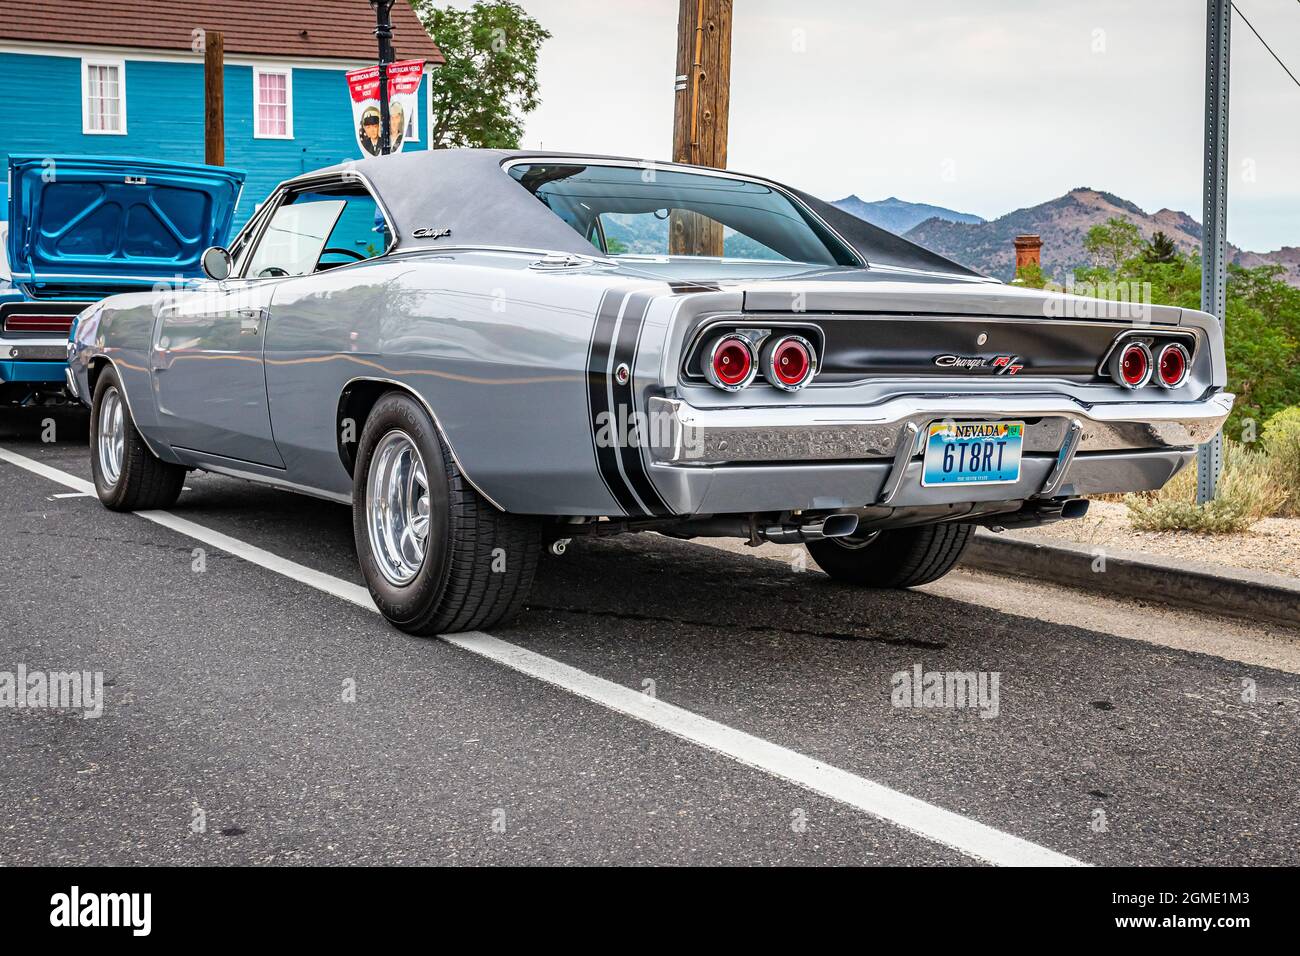 Virginia City, NV - July 31, 2021: 1968 Dodge Charger R/T hardtop coupe at a local car show. Stock Photo